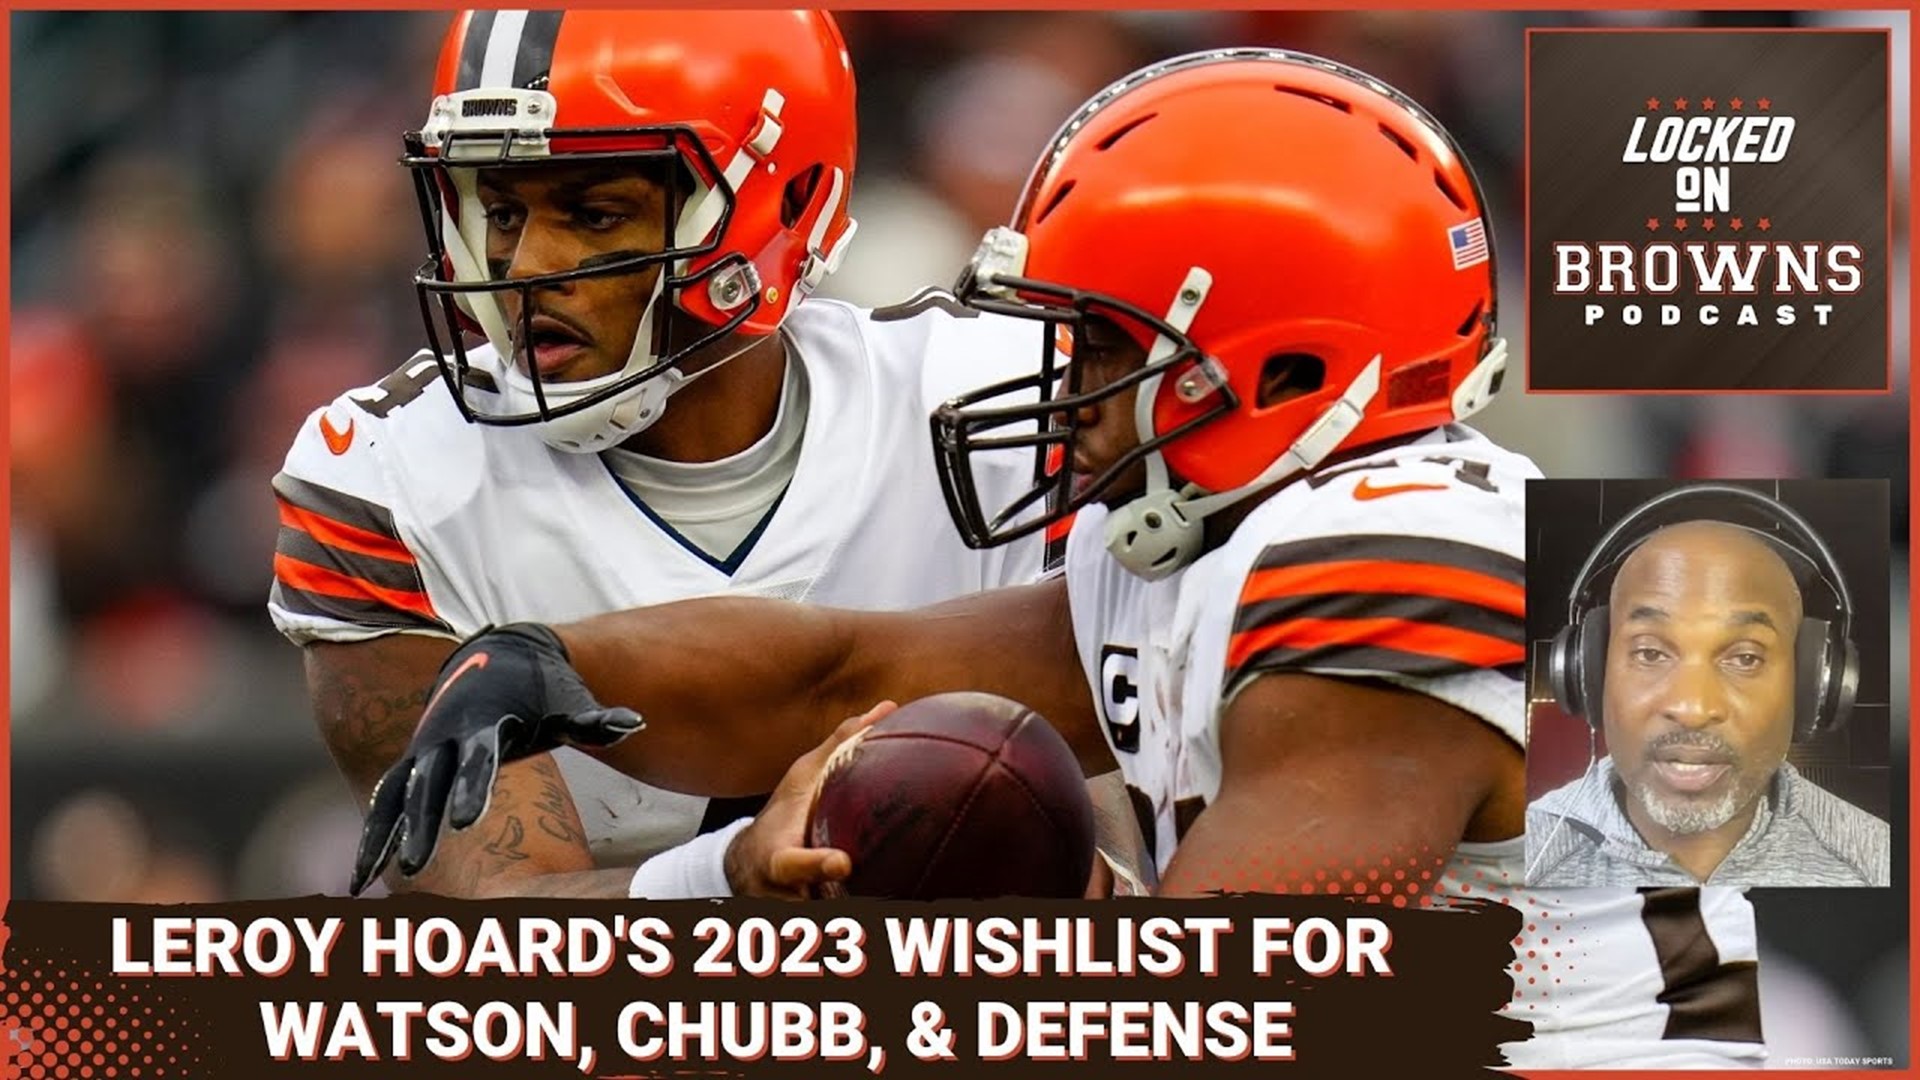 If you're a Browns fan, this is definitely a video you don't want to miss!